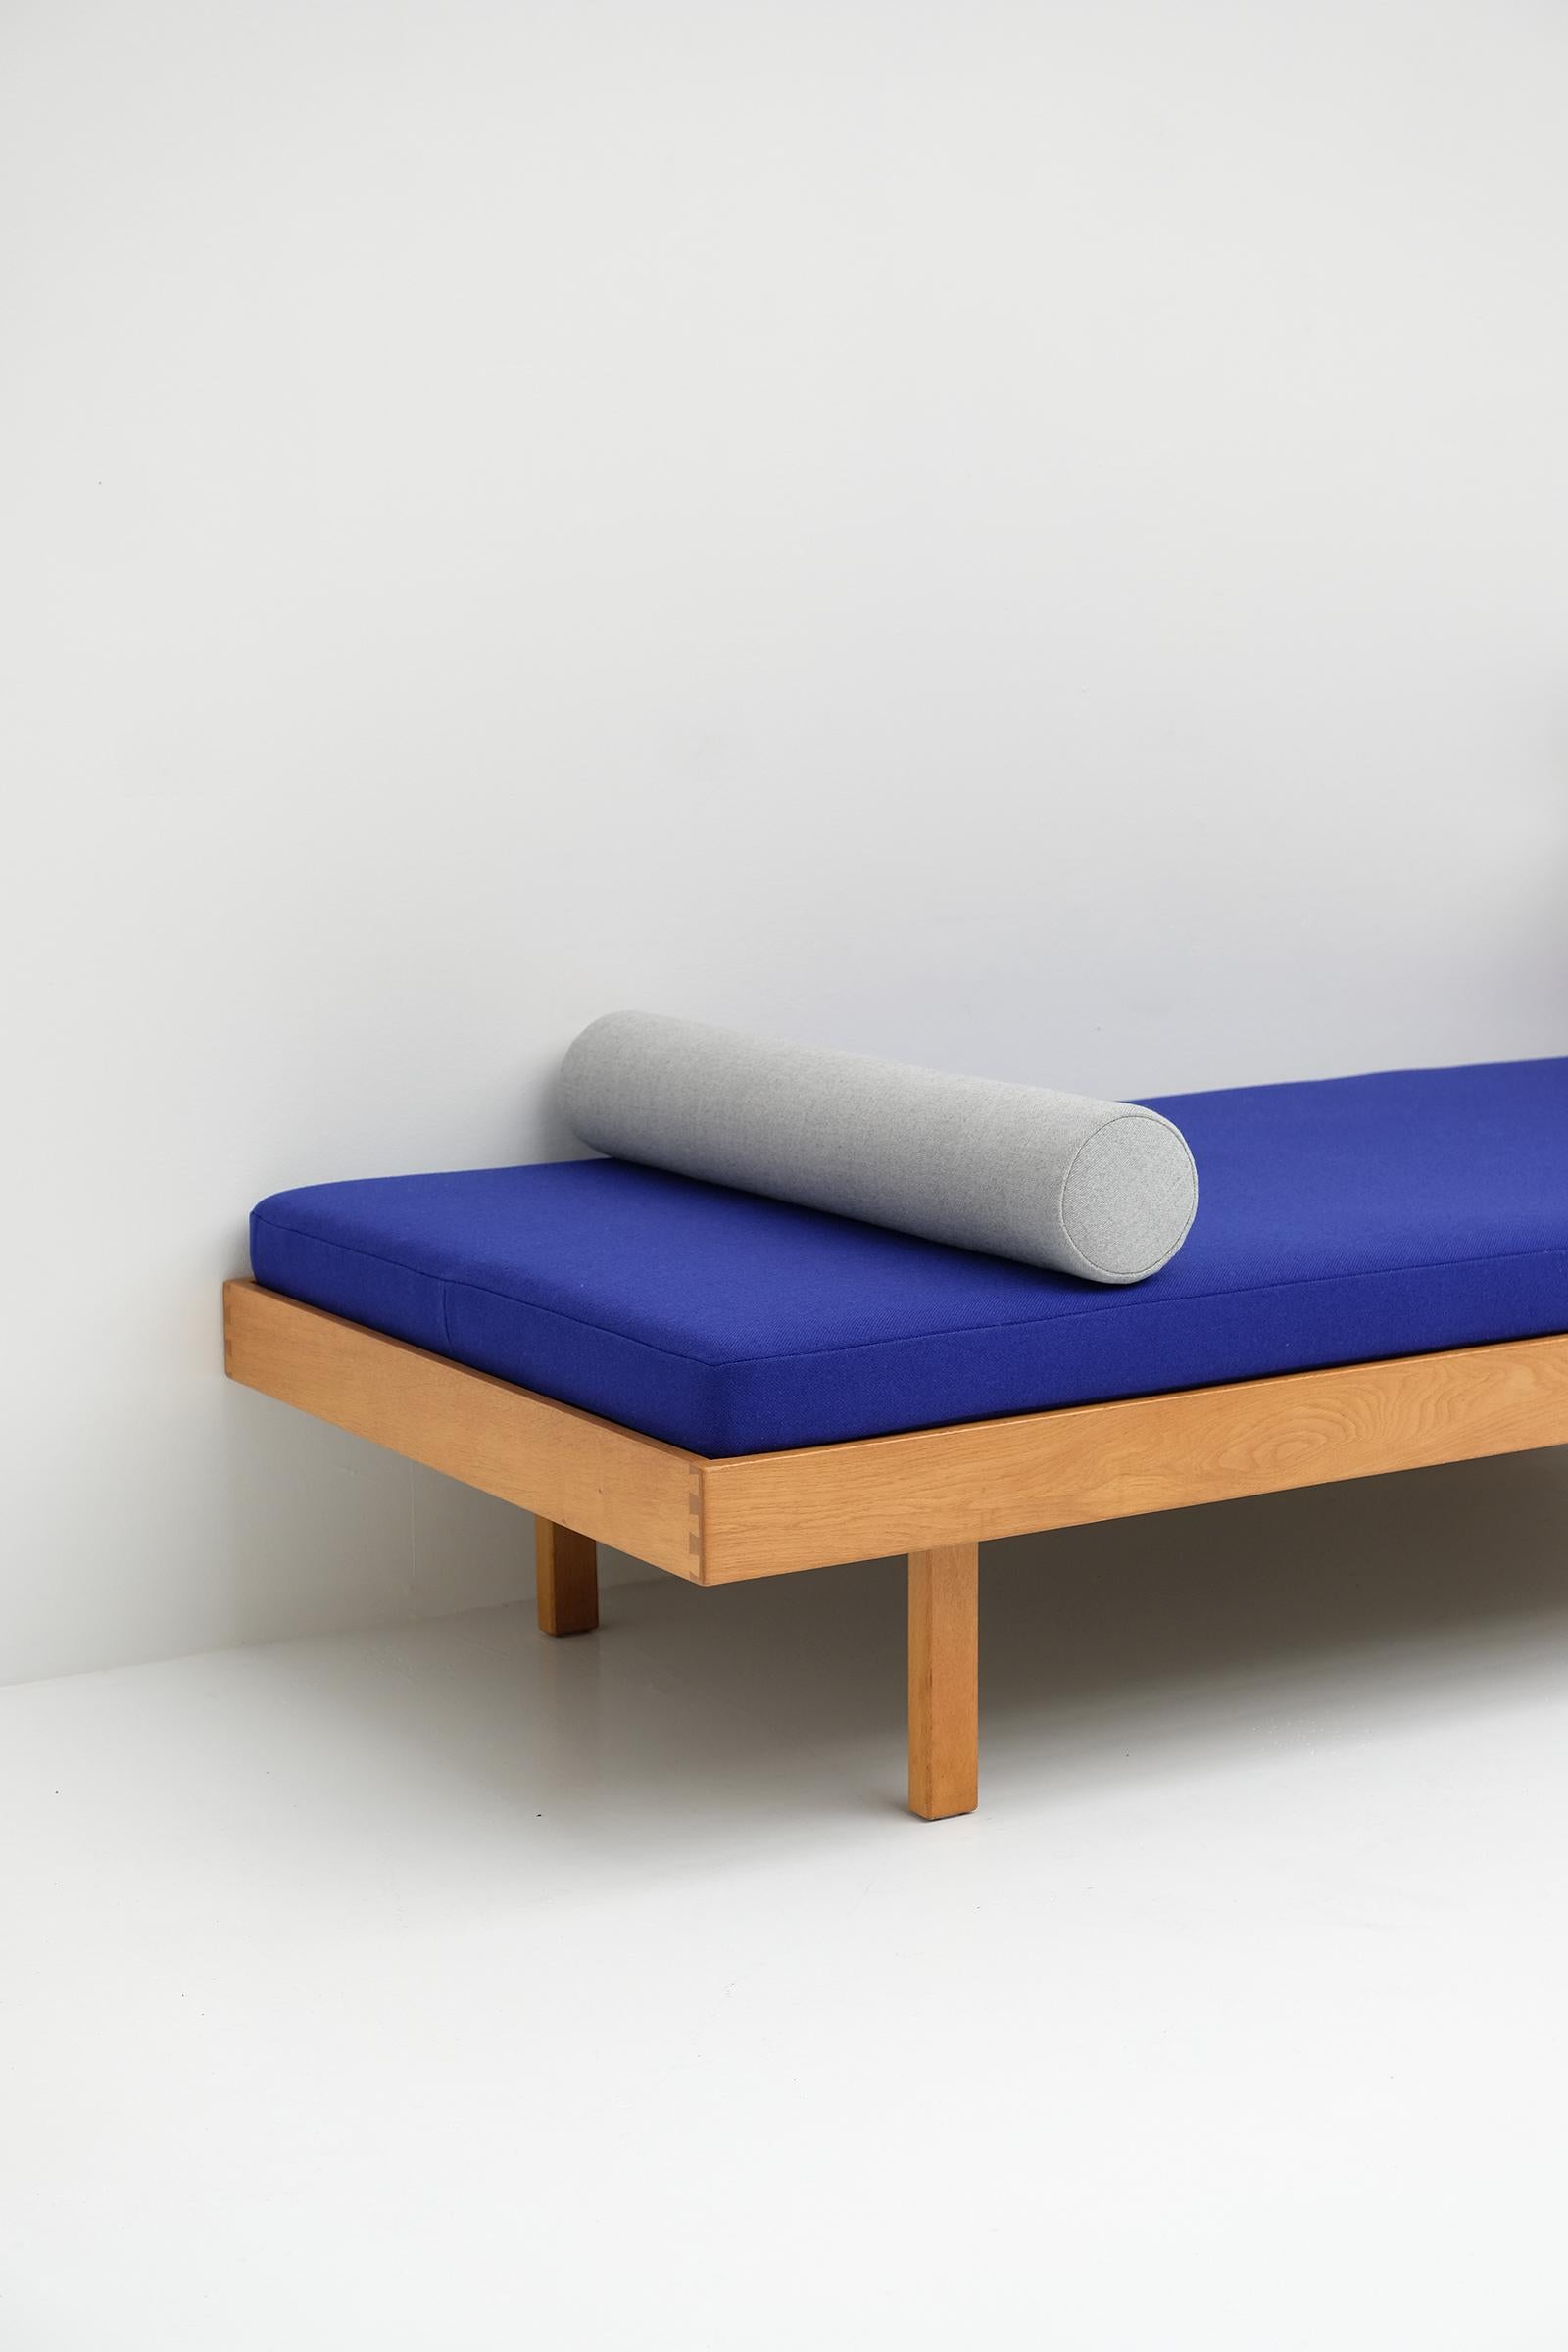 Van Den Berghe Pauvers Daybed bY Jos De Mey 1963

This nice Belgian modern daybed was designed by Jos De Mey for Van Den Berghe Pauvers in 1963. Due its high legs and design, this daybed has a timeless and playful look. For the upholstery I did